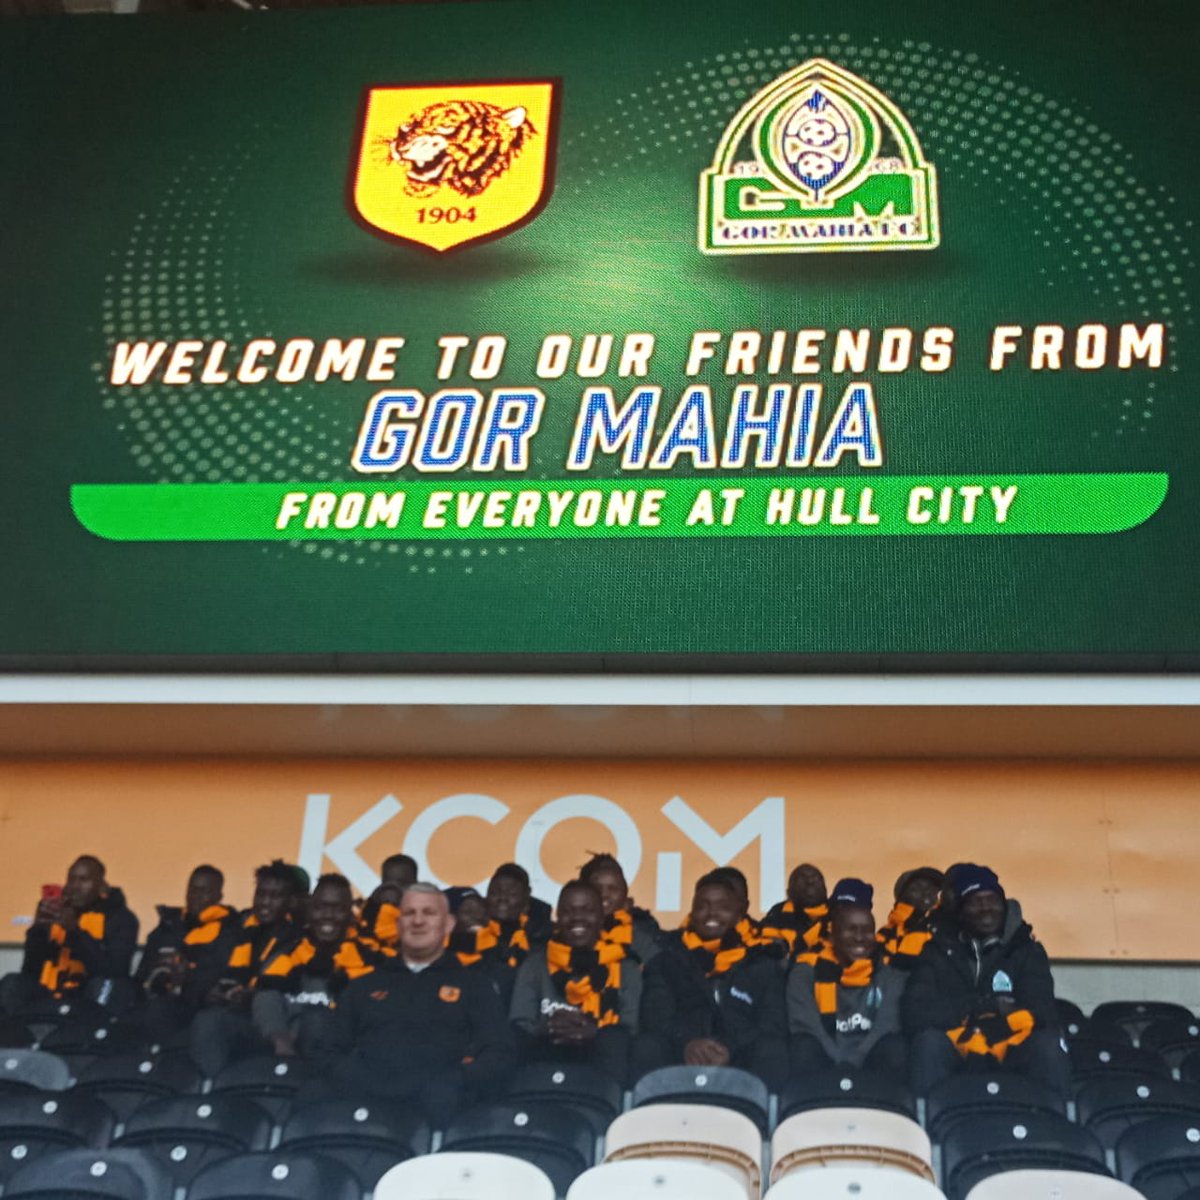 Hull left some warmness here. They created lasting friendships. It is for this reason that when Gor Mahia went to the UK in November same year they asked to go to Hull City as well.